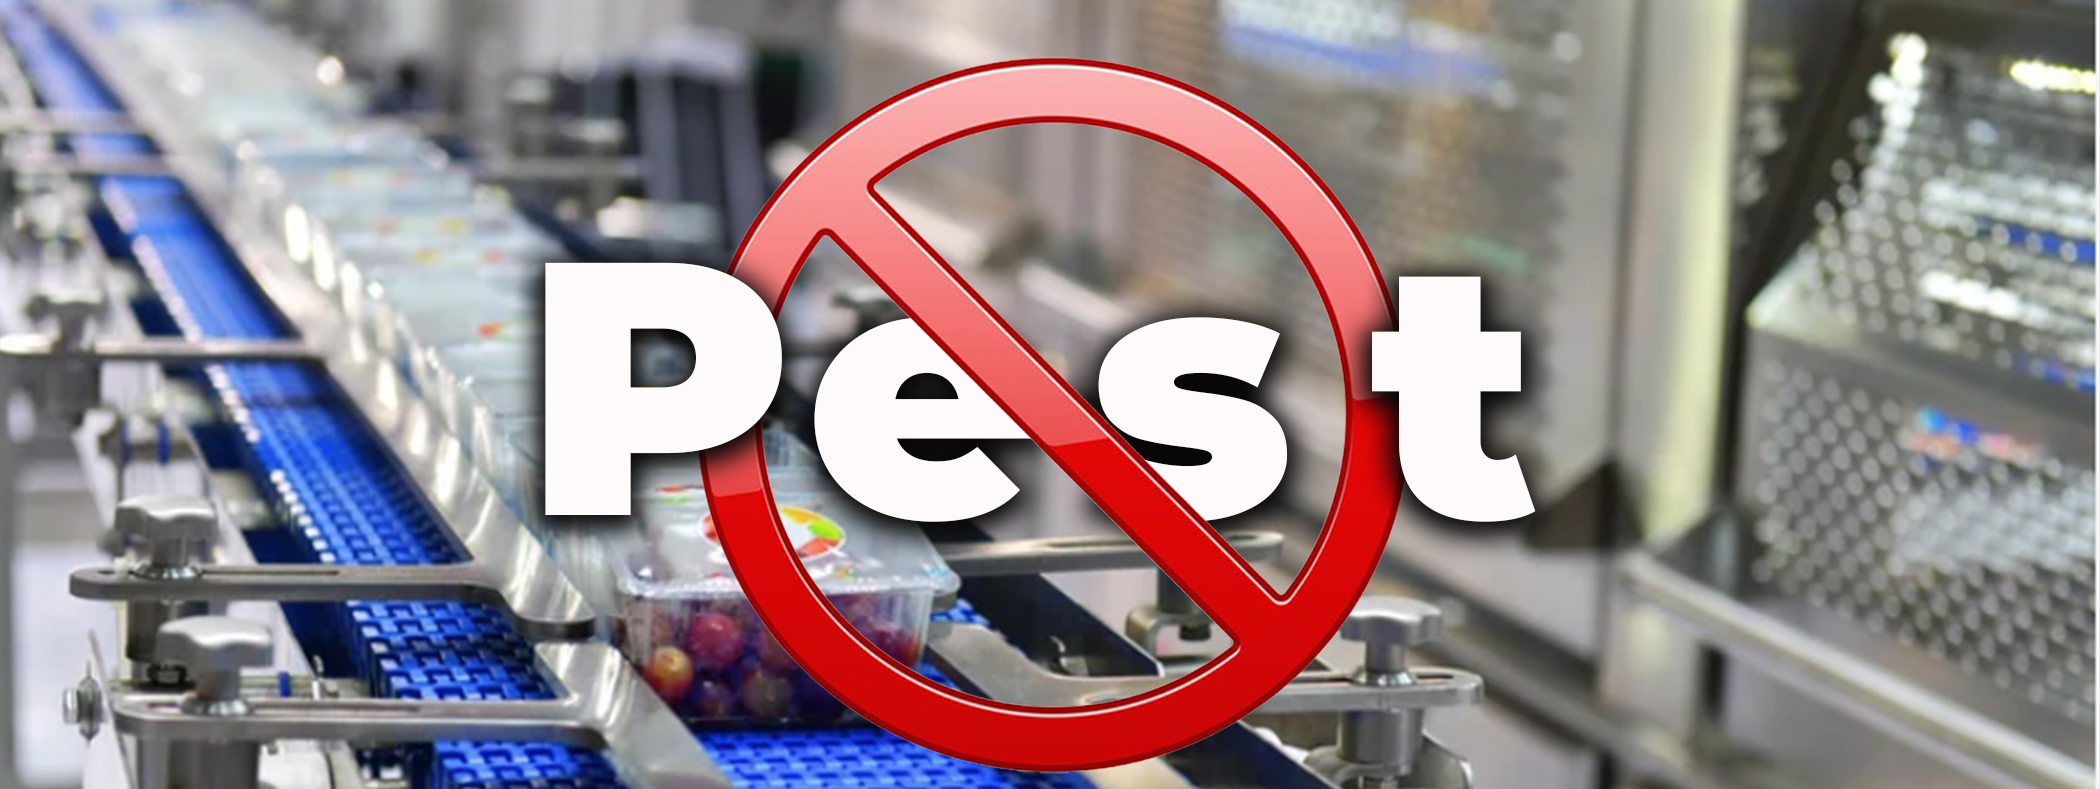 How To Keep Pests Out of Your Food Manufacturing Business